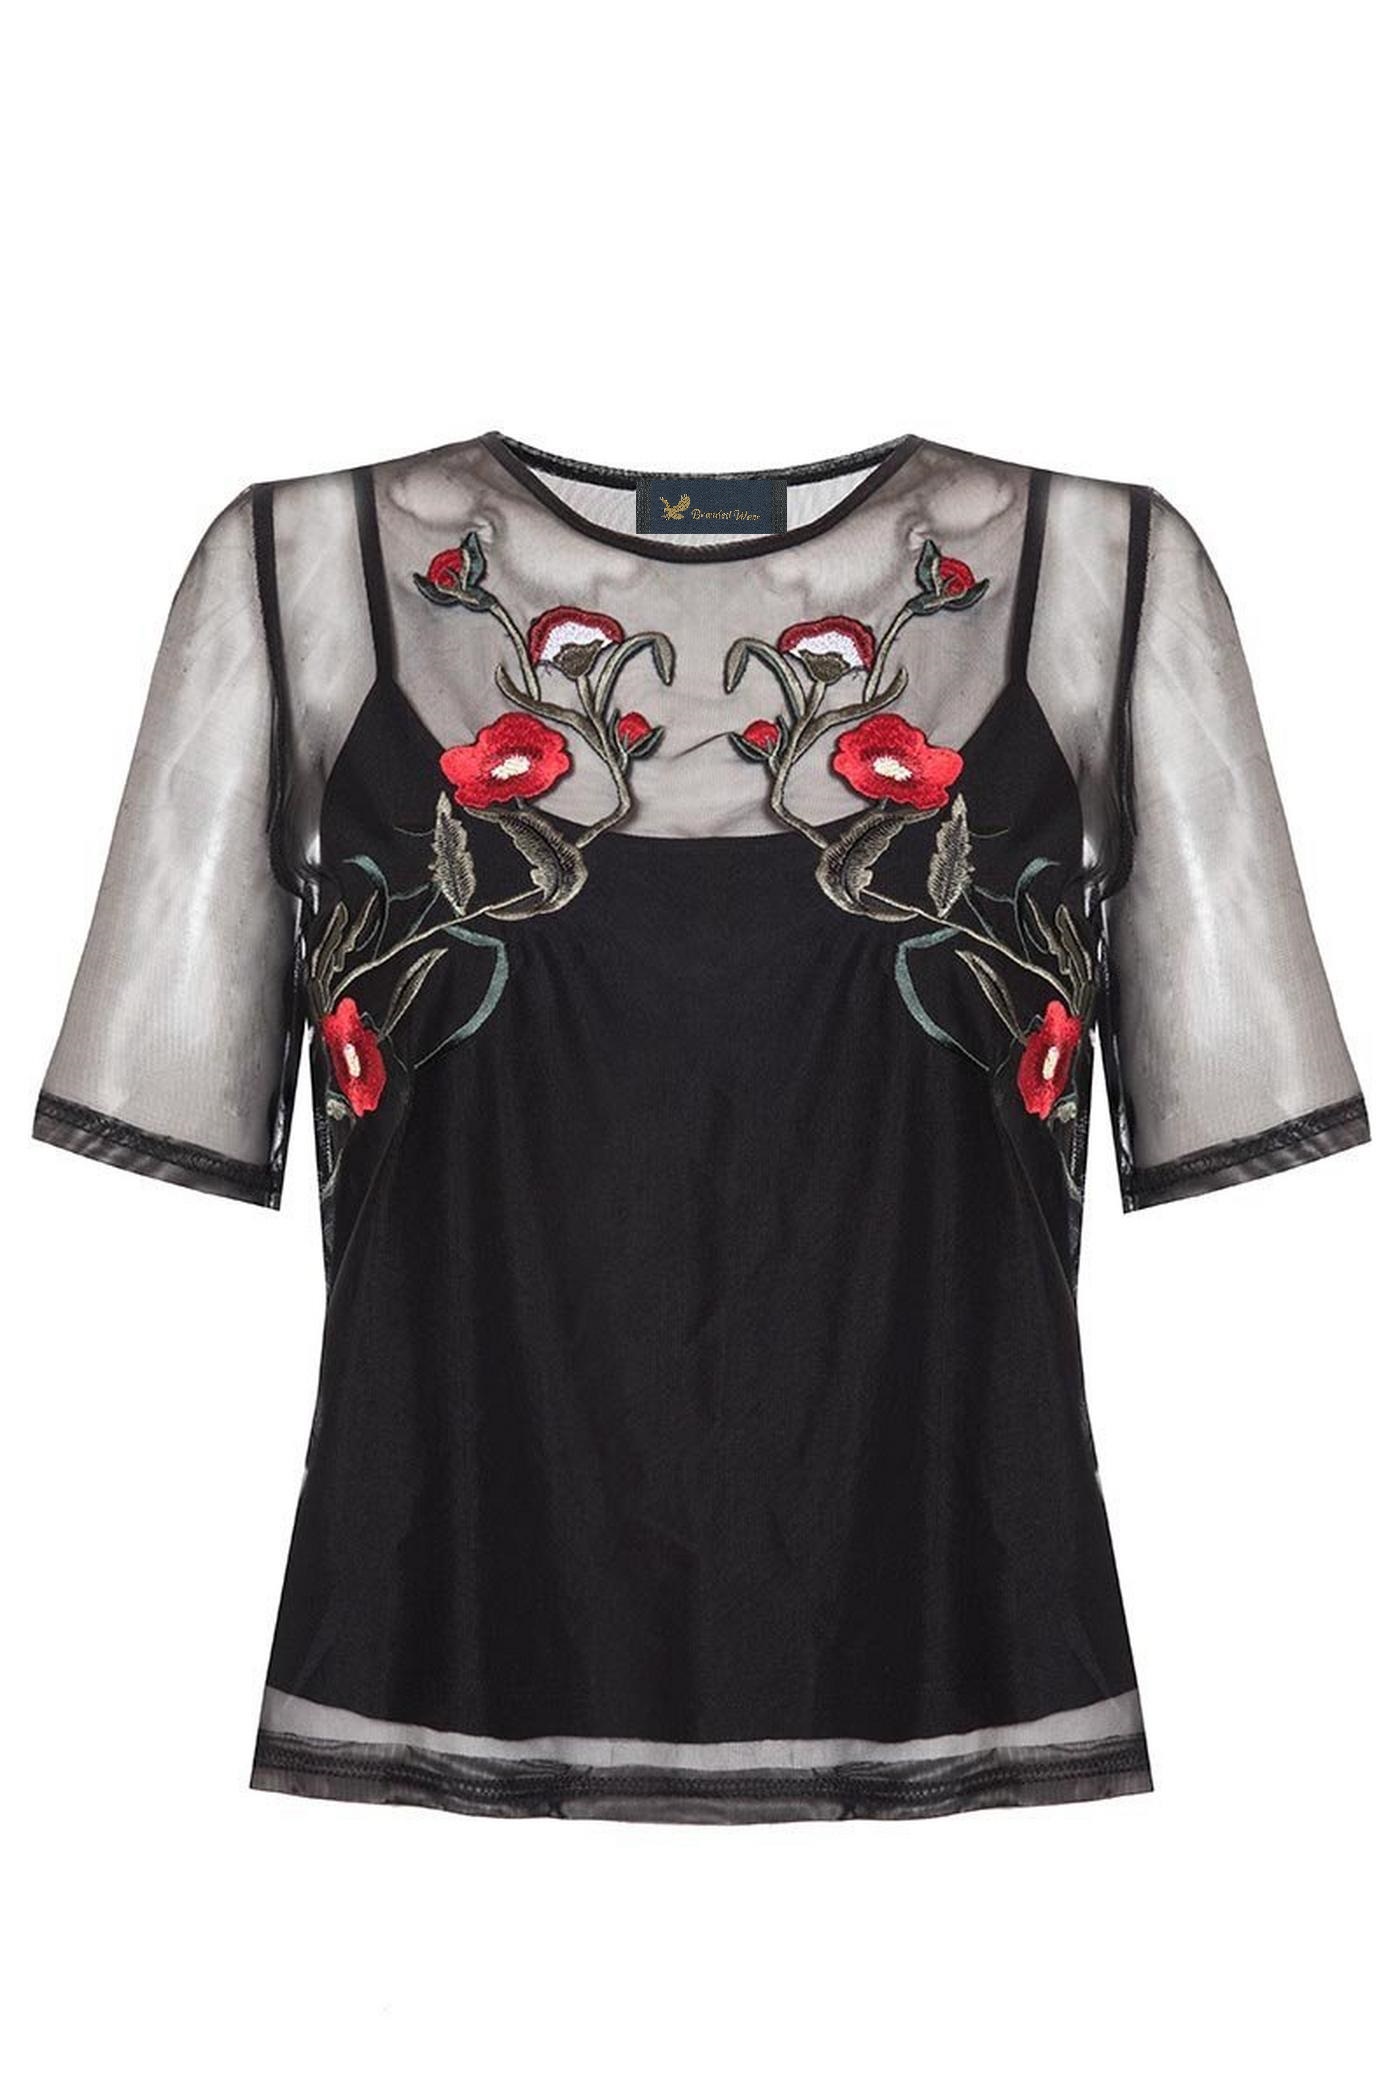 Black Embroidered Floral Mesh Overlay Top